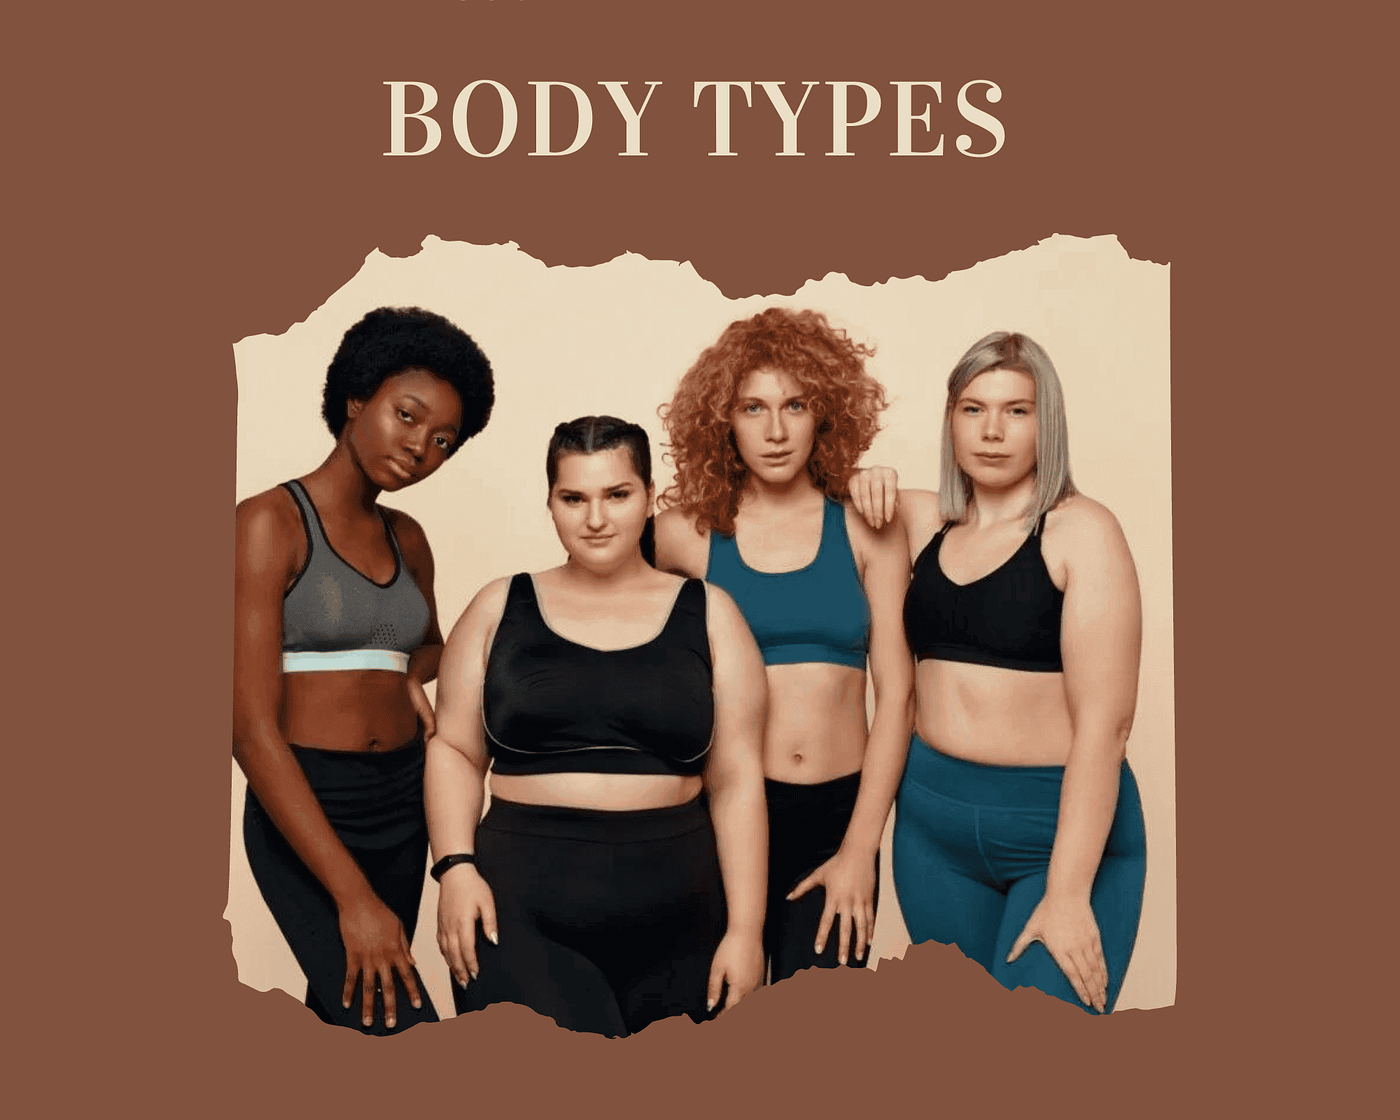 Discover How To Dress Your Body Type (Once & For All!) - Corporate